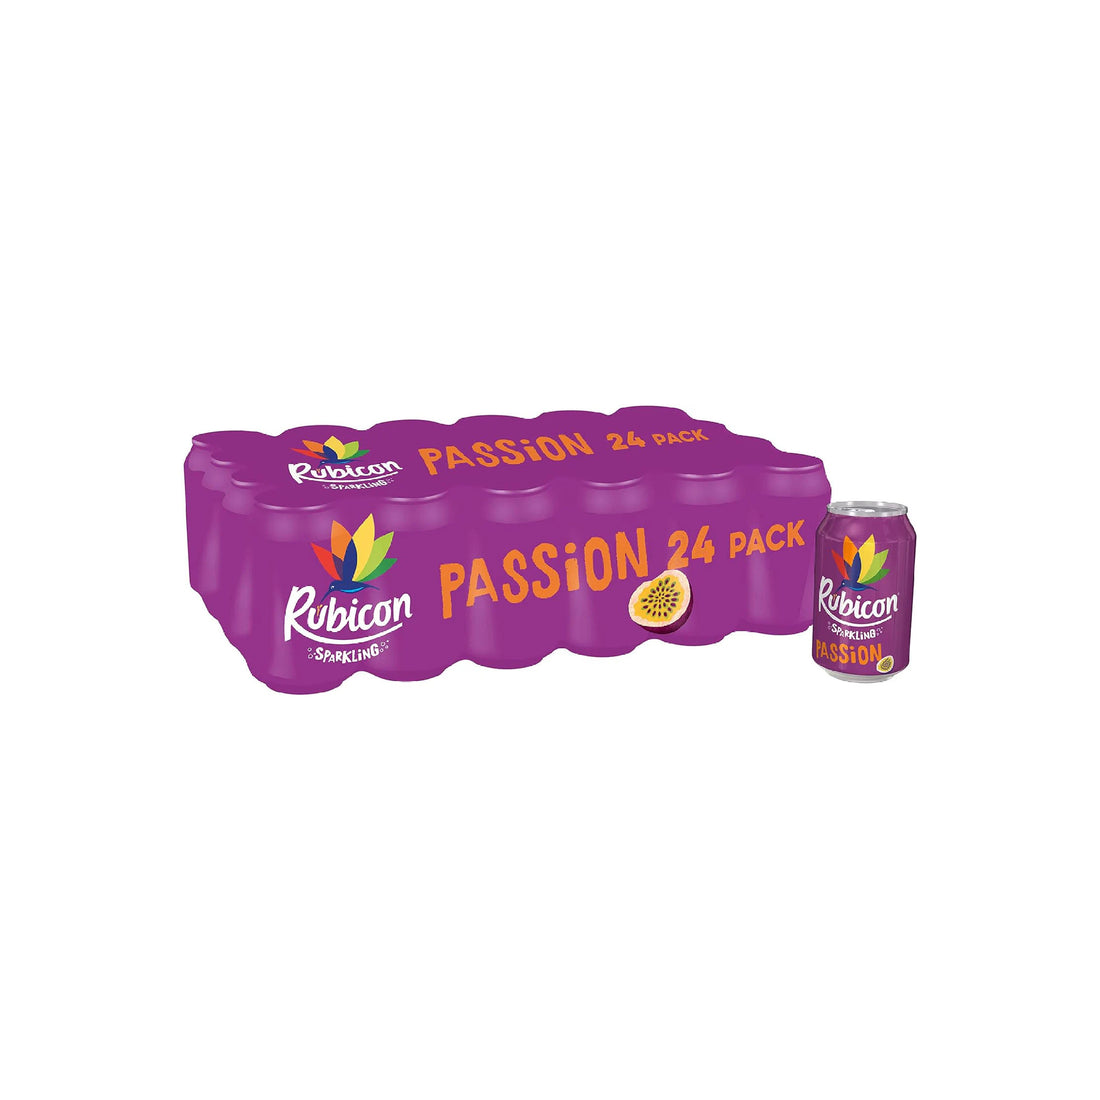 Rubicon Passion 24 pack 330ml